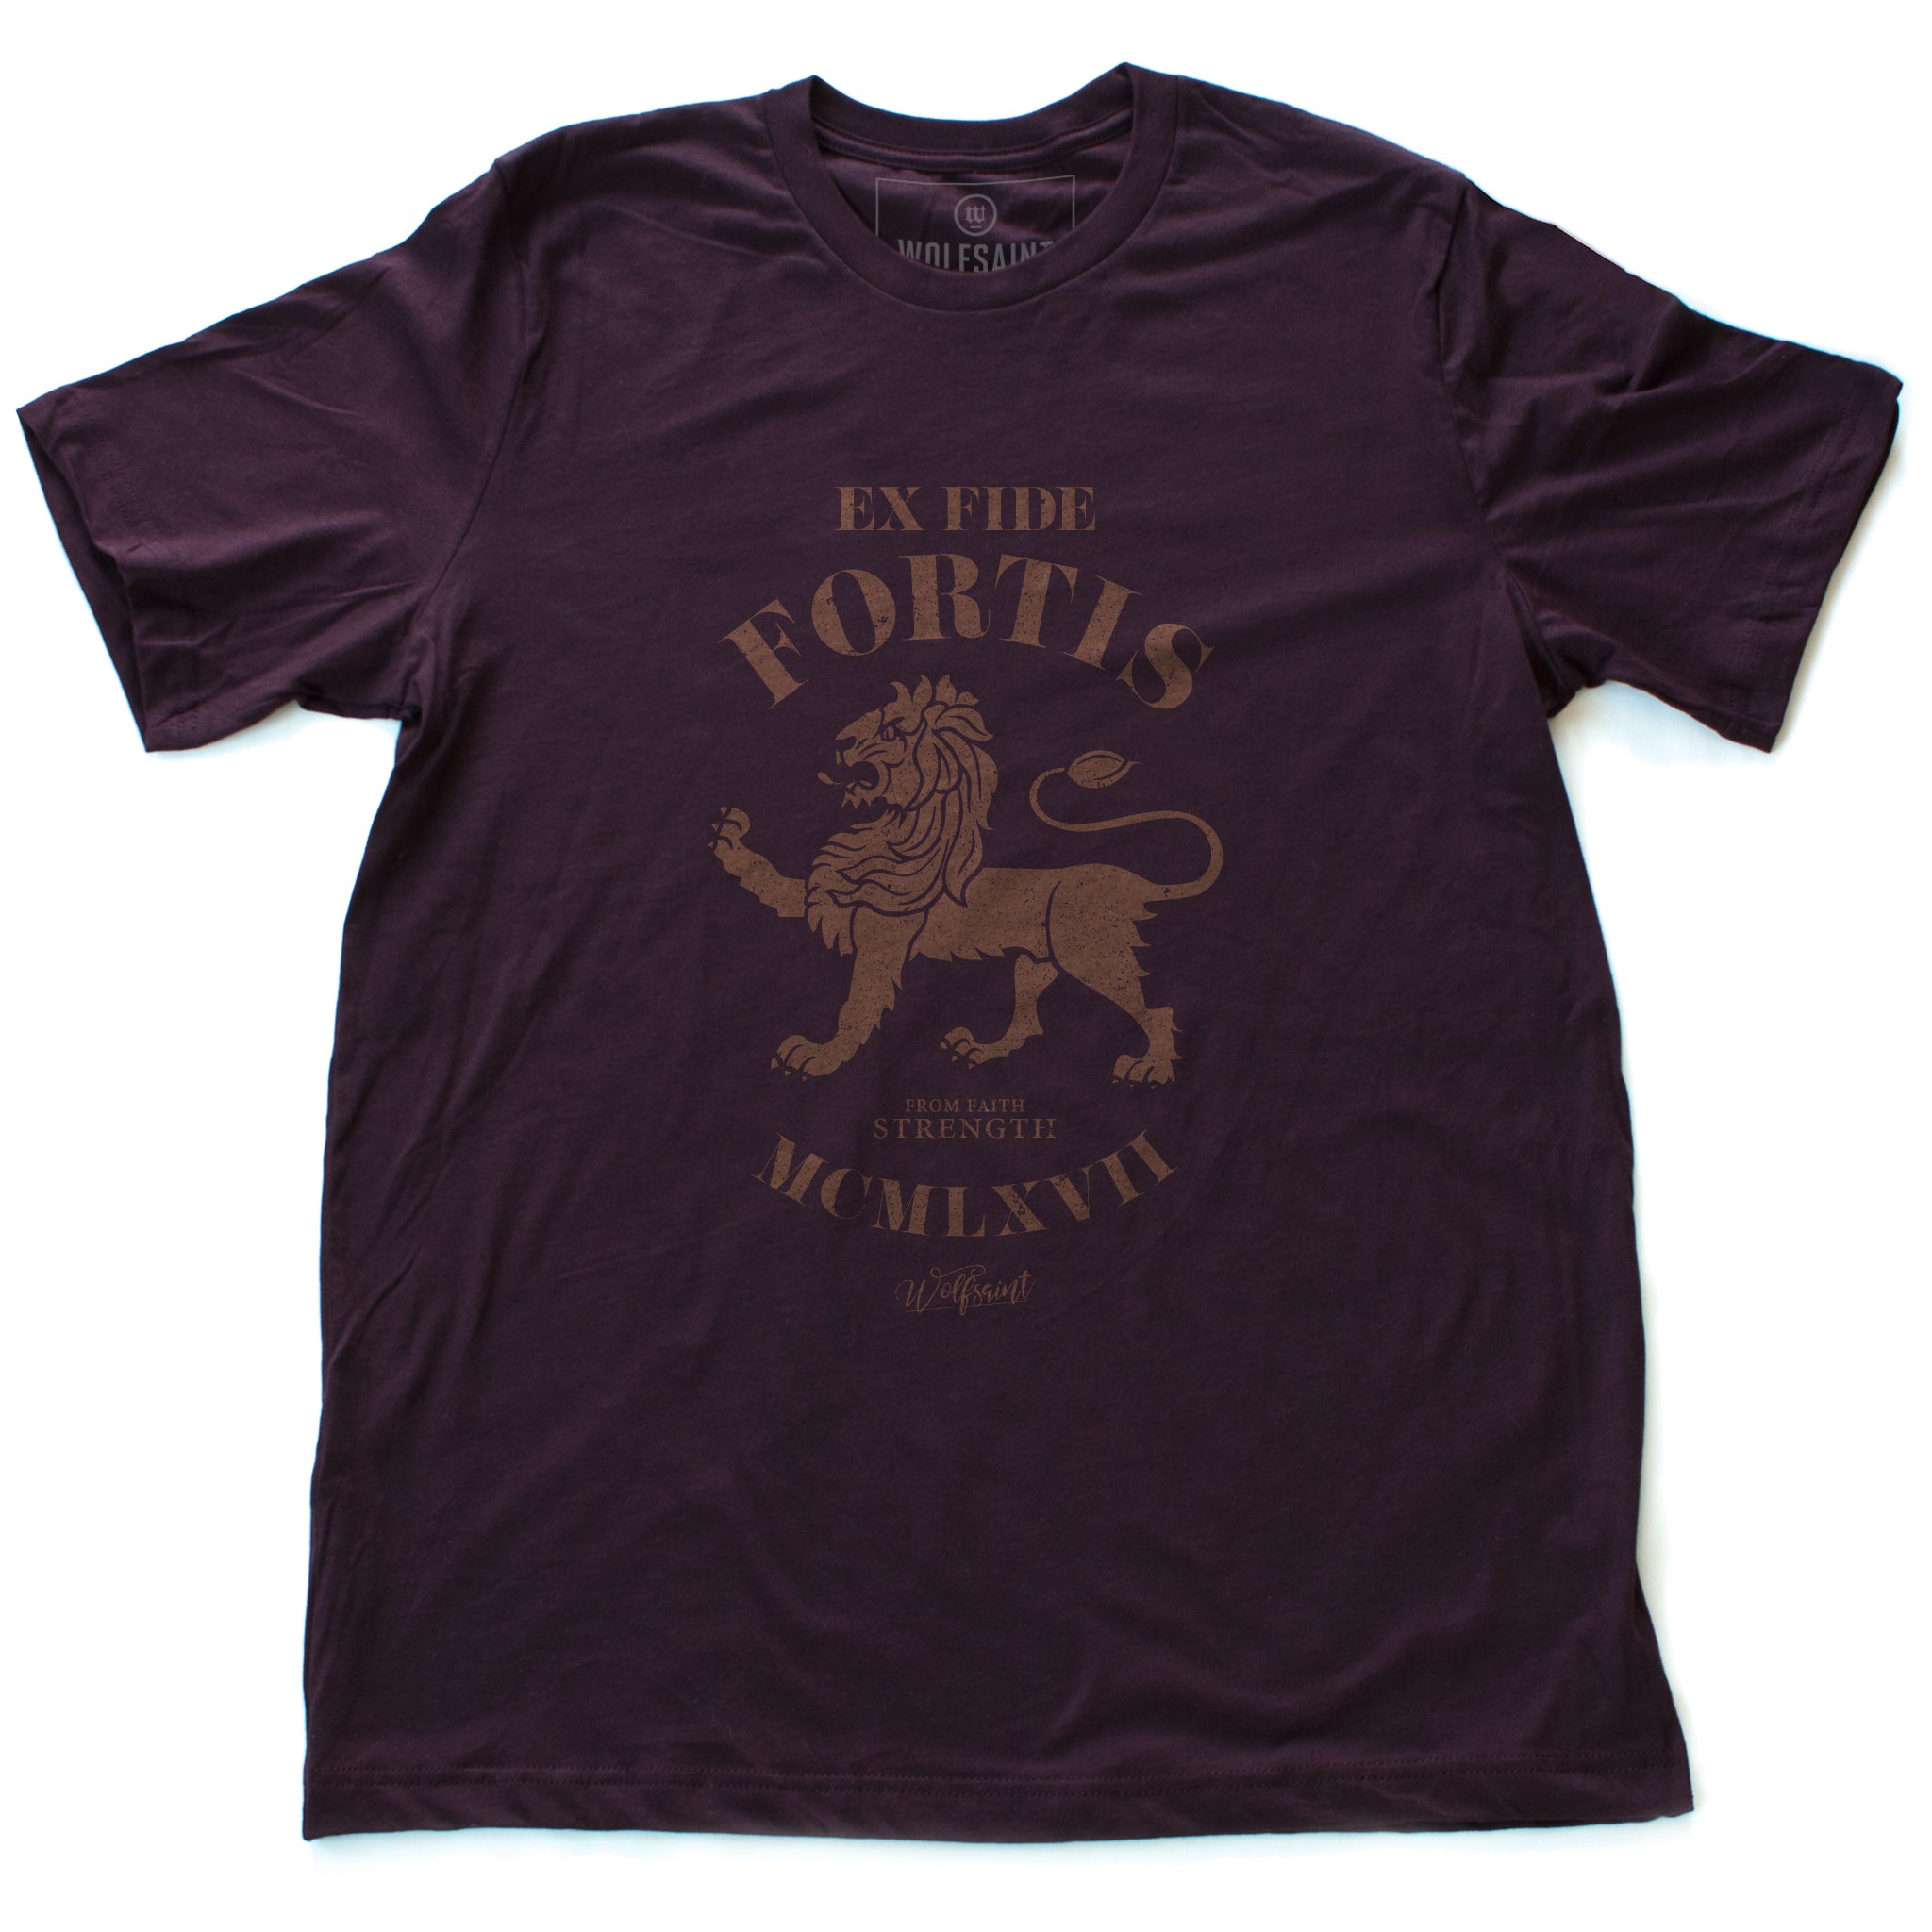 A vintage-inspired classic oxblood retro t-shirt featuring a strong graphic of a lion, with the Latin phrase meaning “Out of faith, strength.” By wolfsaint.net